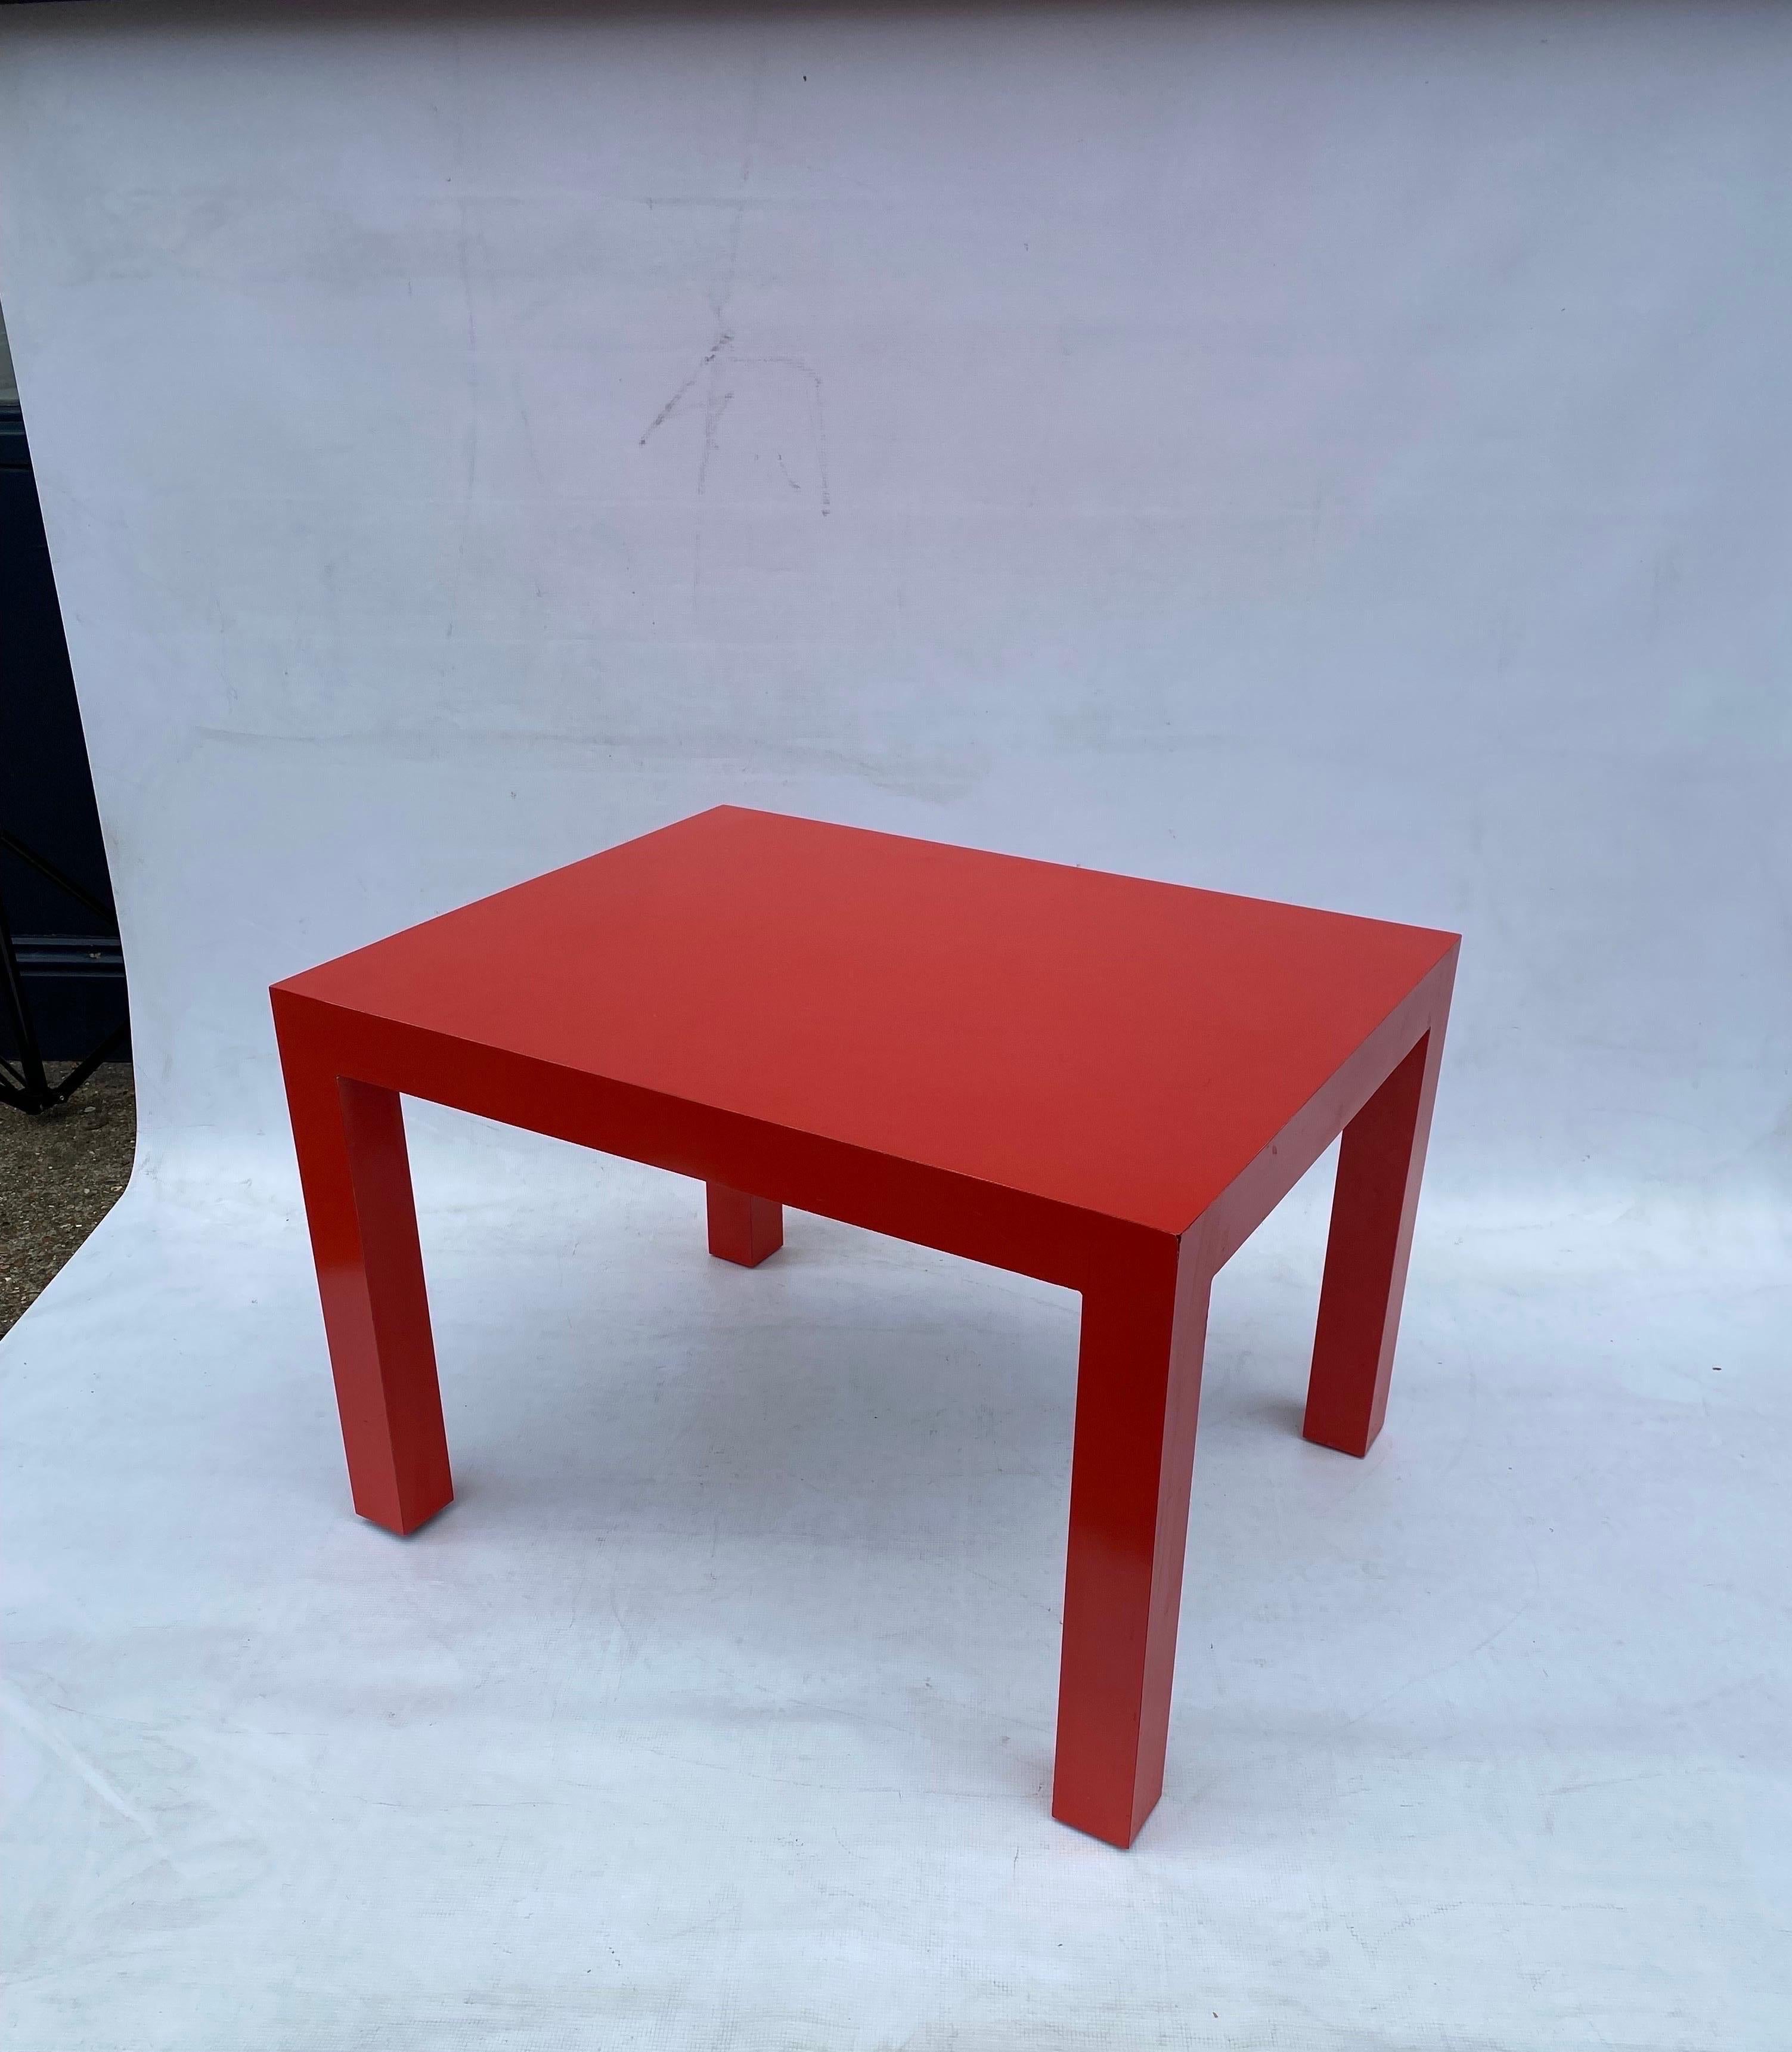 Mid-20th Century Milo Baughman for Thayer Coggin Formica Red Side Coffee Table 1960s Mid Century  For Sale